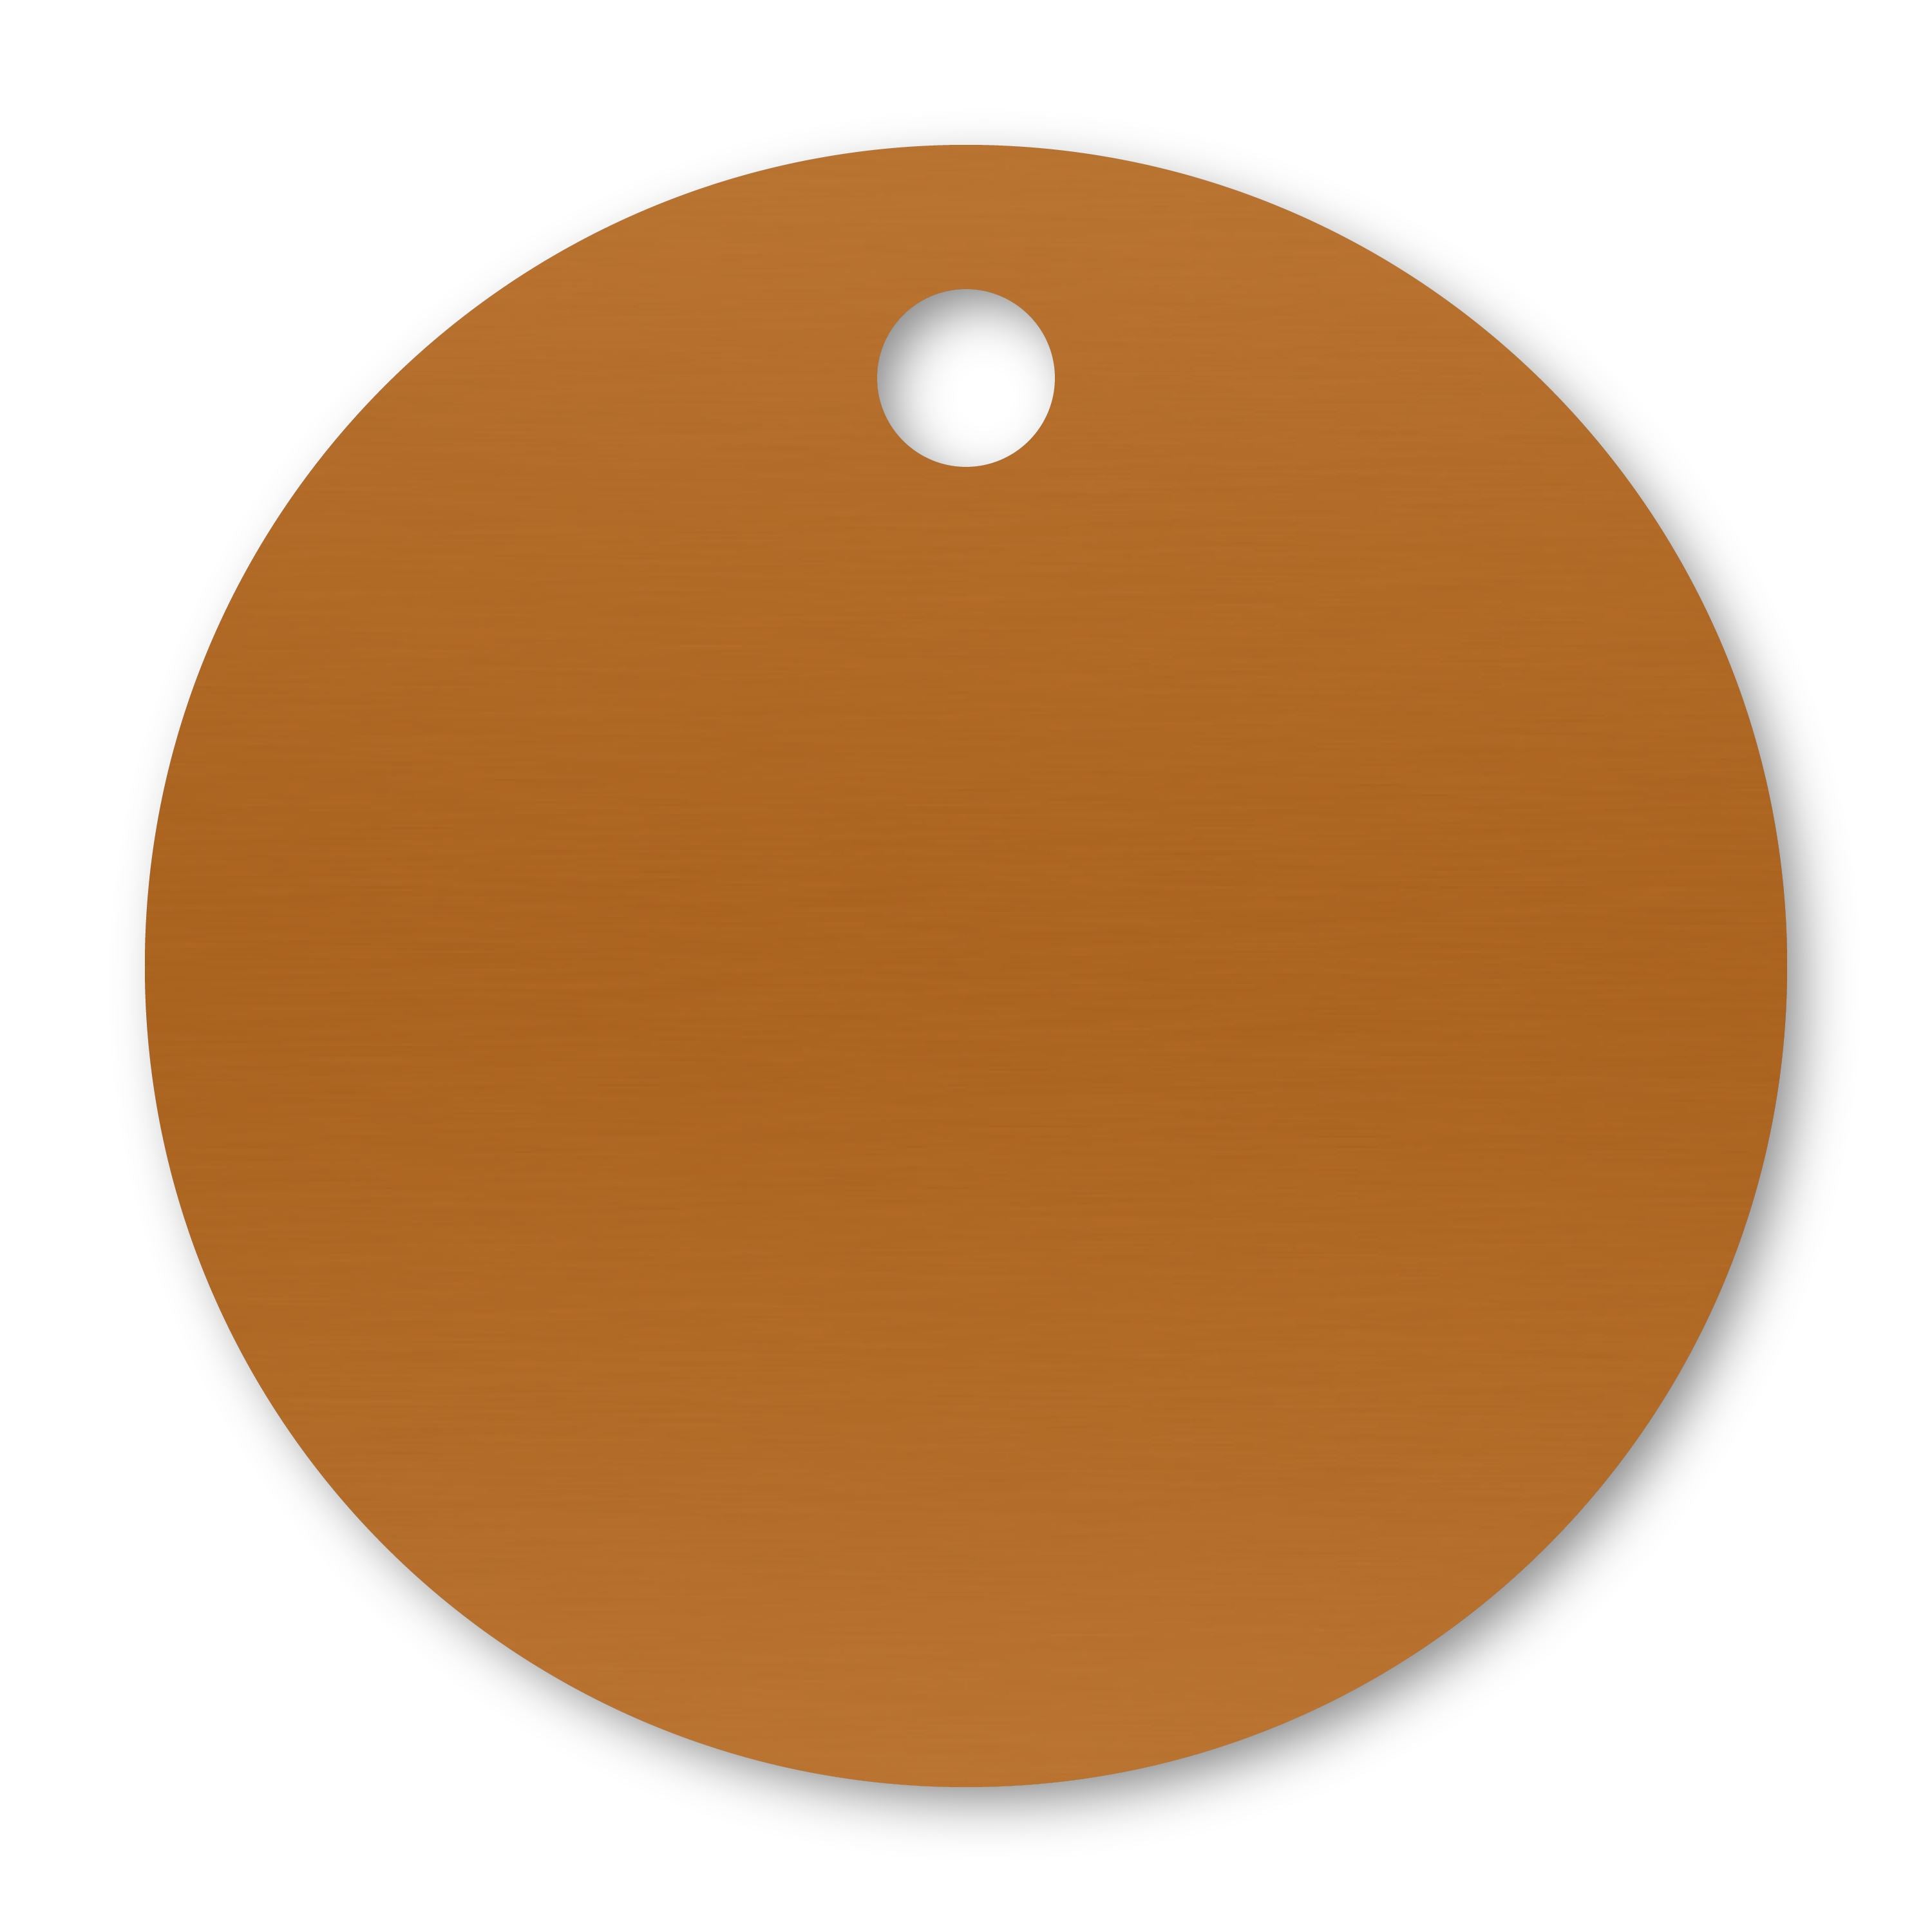 Anodized Aluminum Round Tags, 1-1/4" with 1/8" Hole, Laser Engraved Metal Tags Craftworks NW Orange 